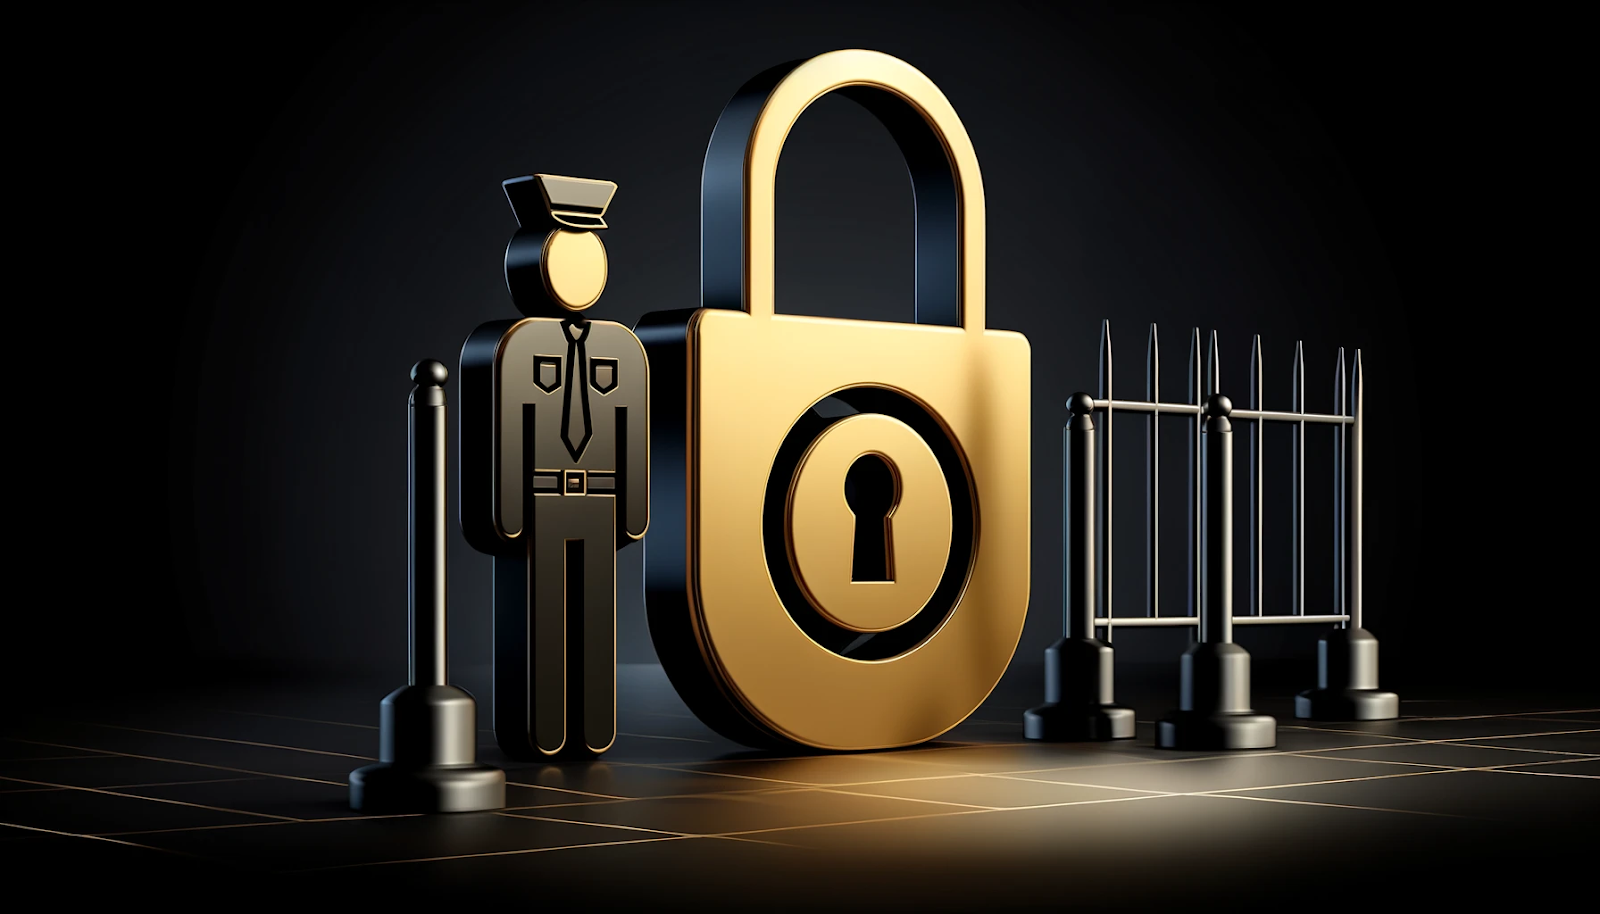 This is a symbolic representation of retail security measures featuring a gold padlock, black security barriers, and a security guard silhouette.